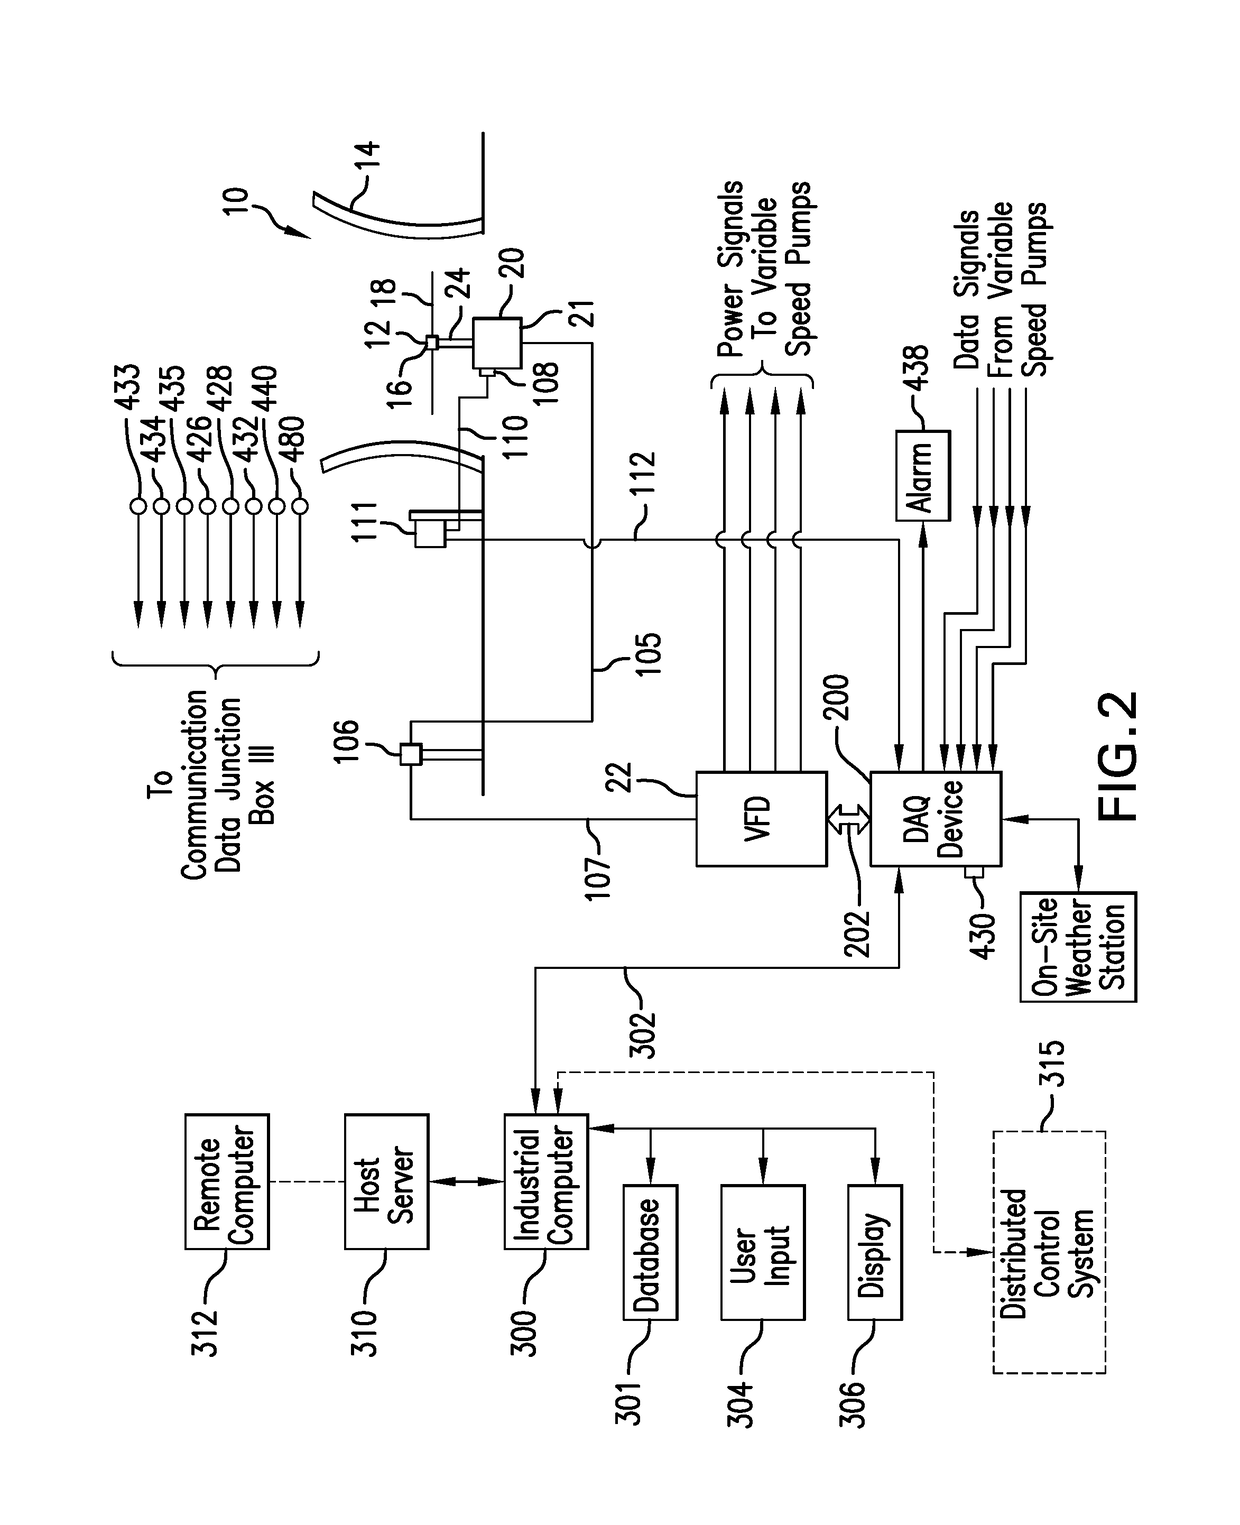 Load Bearing Direct Drive Fan System With Variable Process Control